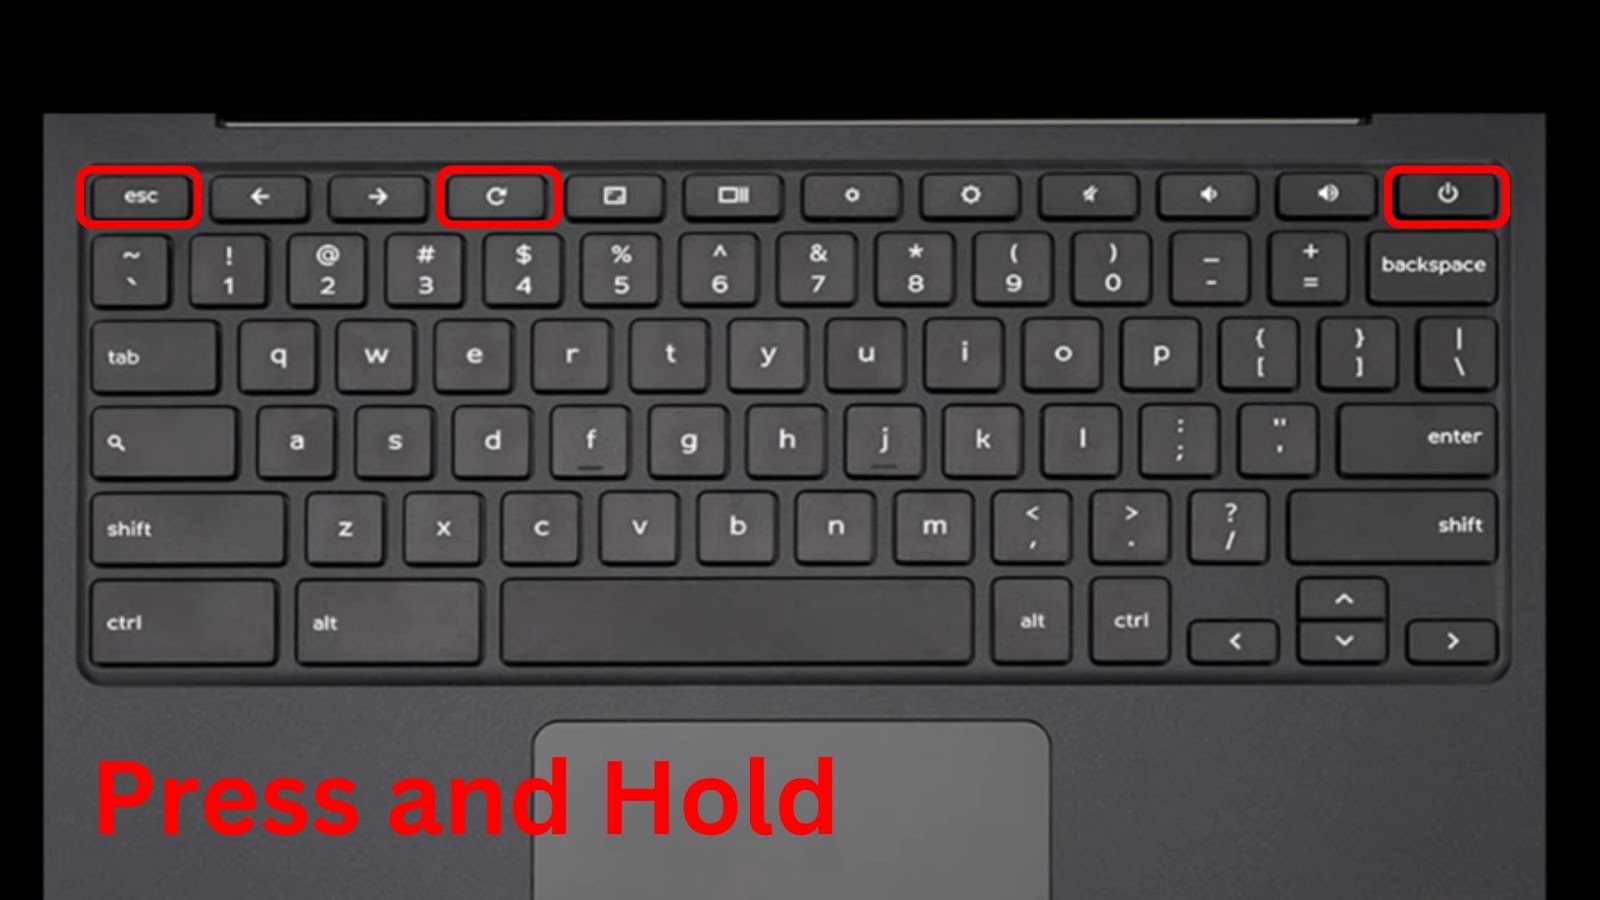 ESC, Refresh, and Power Buttons on a Chromebook